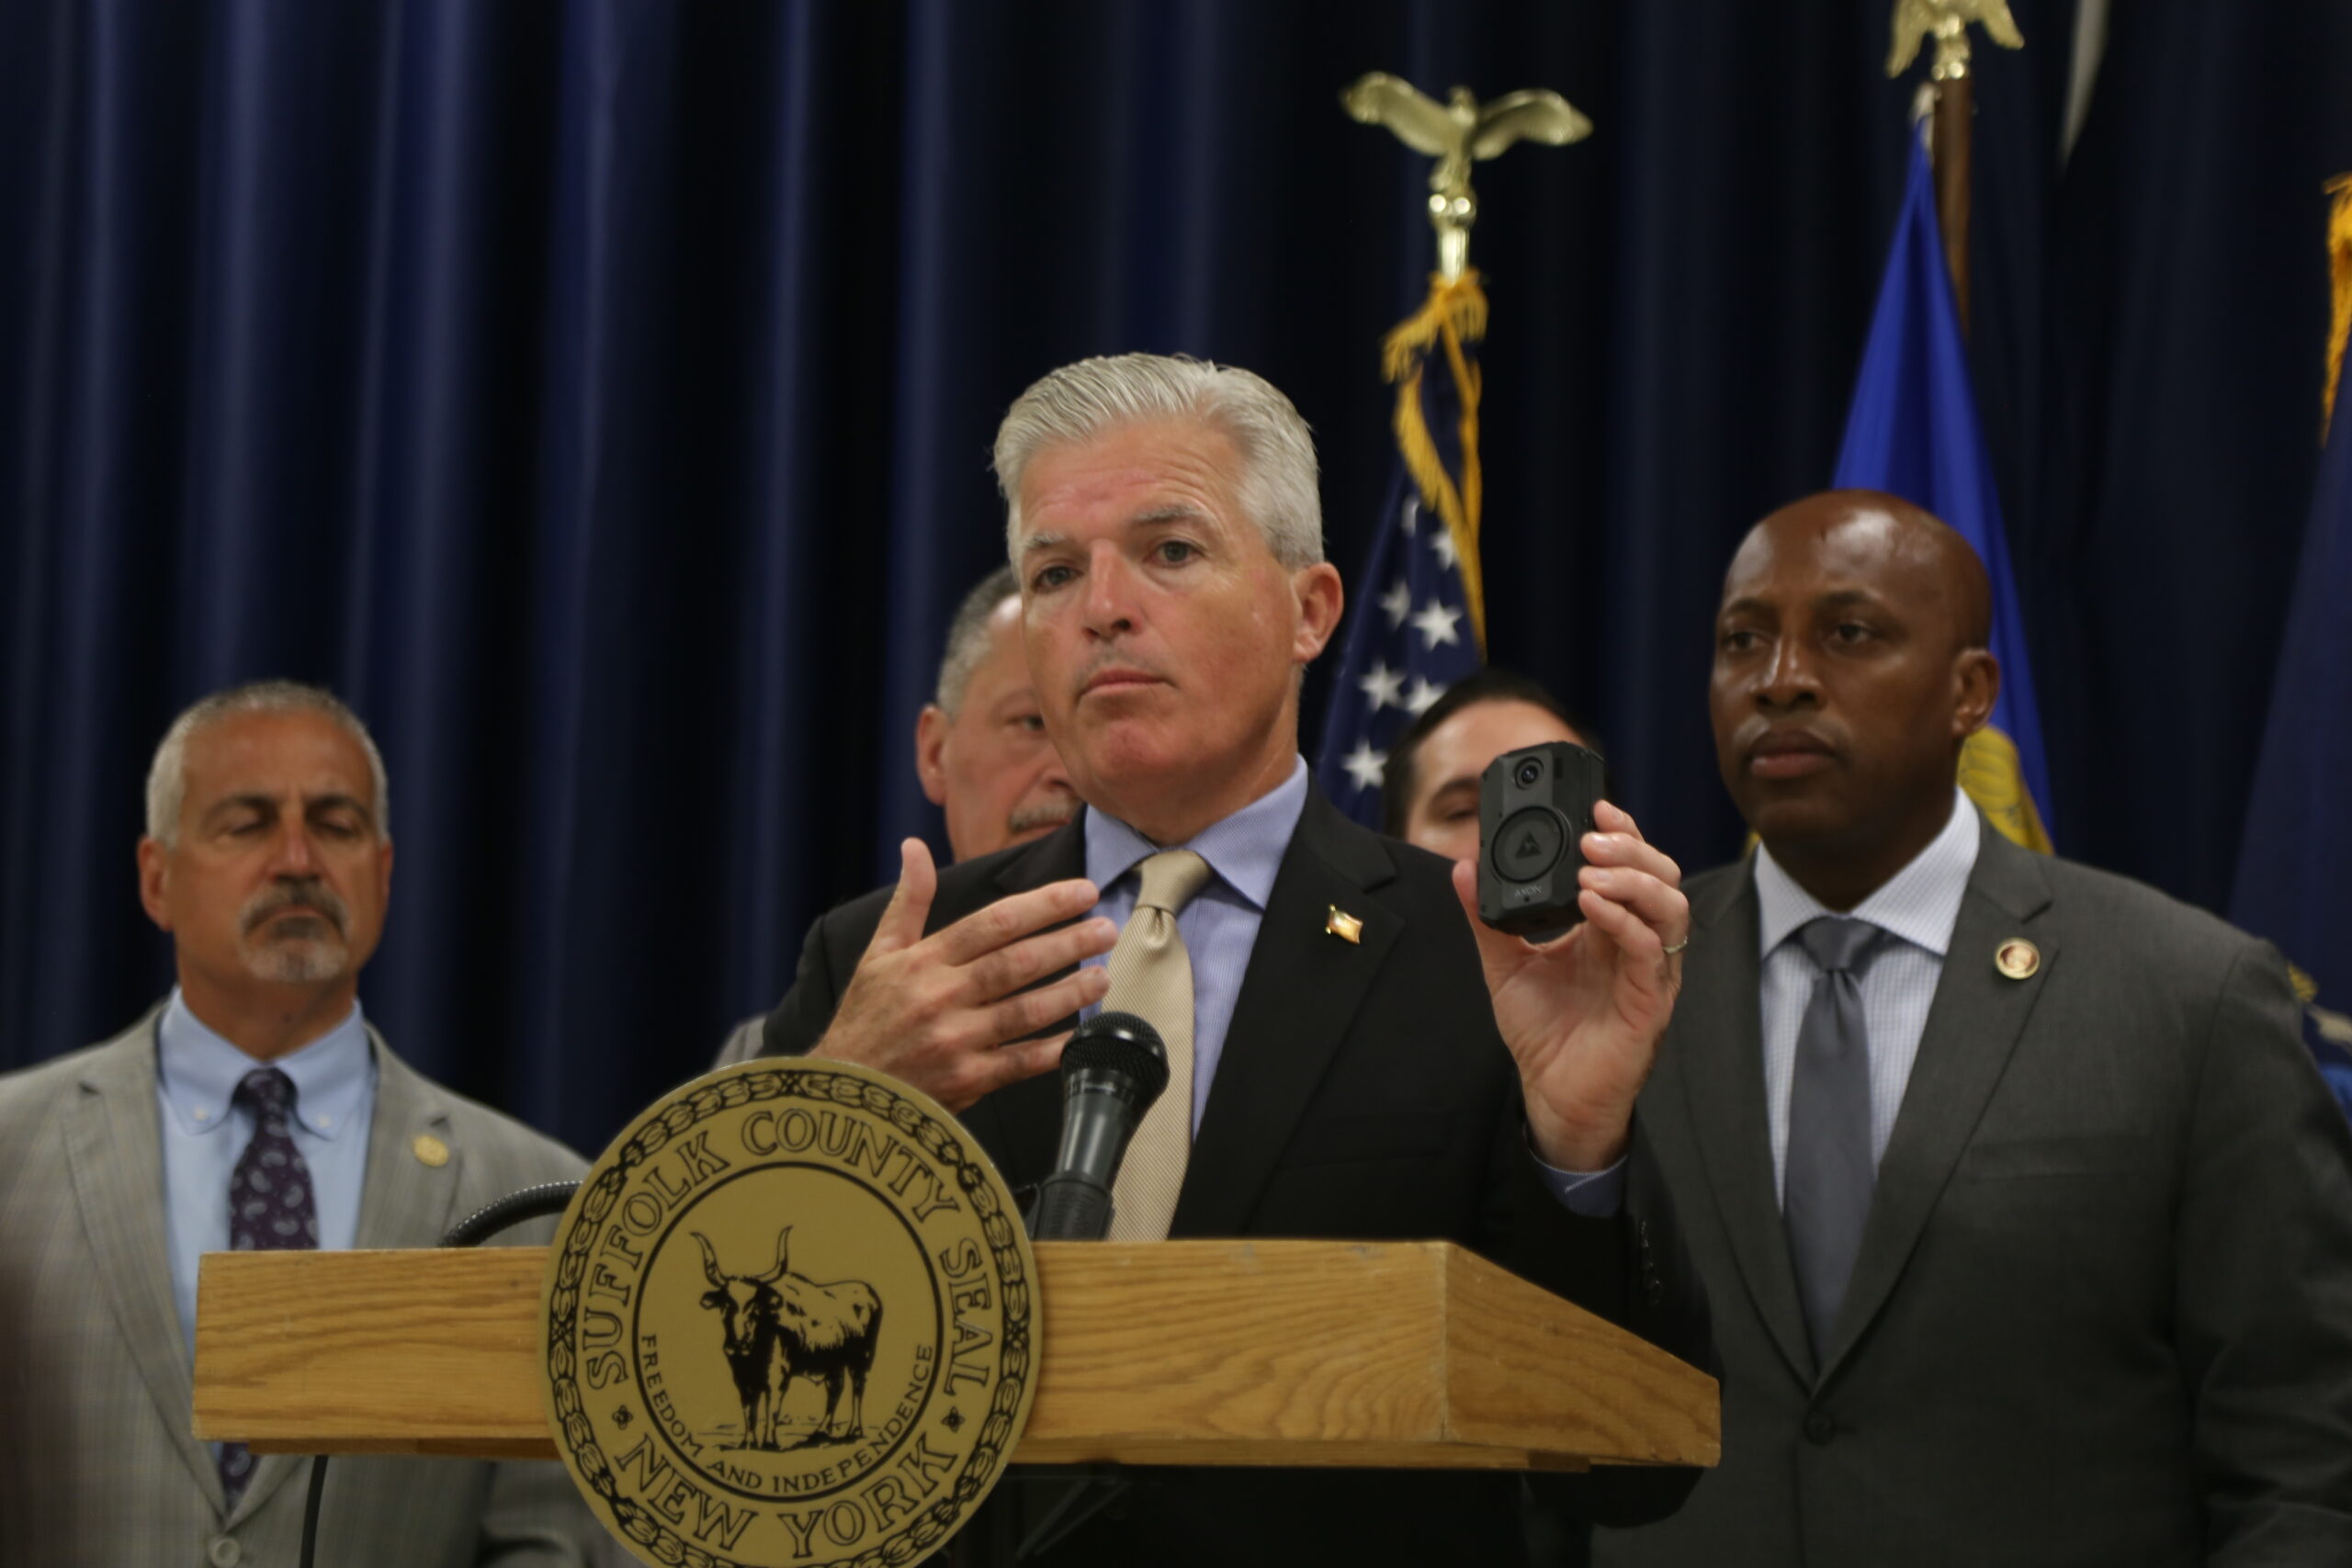 Suffolk County Executive Steve Bellone discusses bodycams during a June press conference announcing the beginning of the Suffolk County Police Department's program.